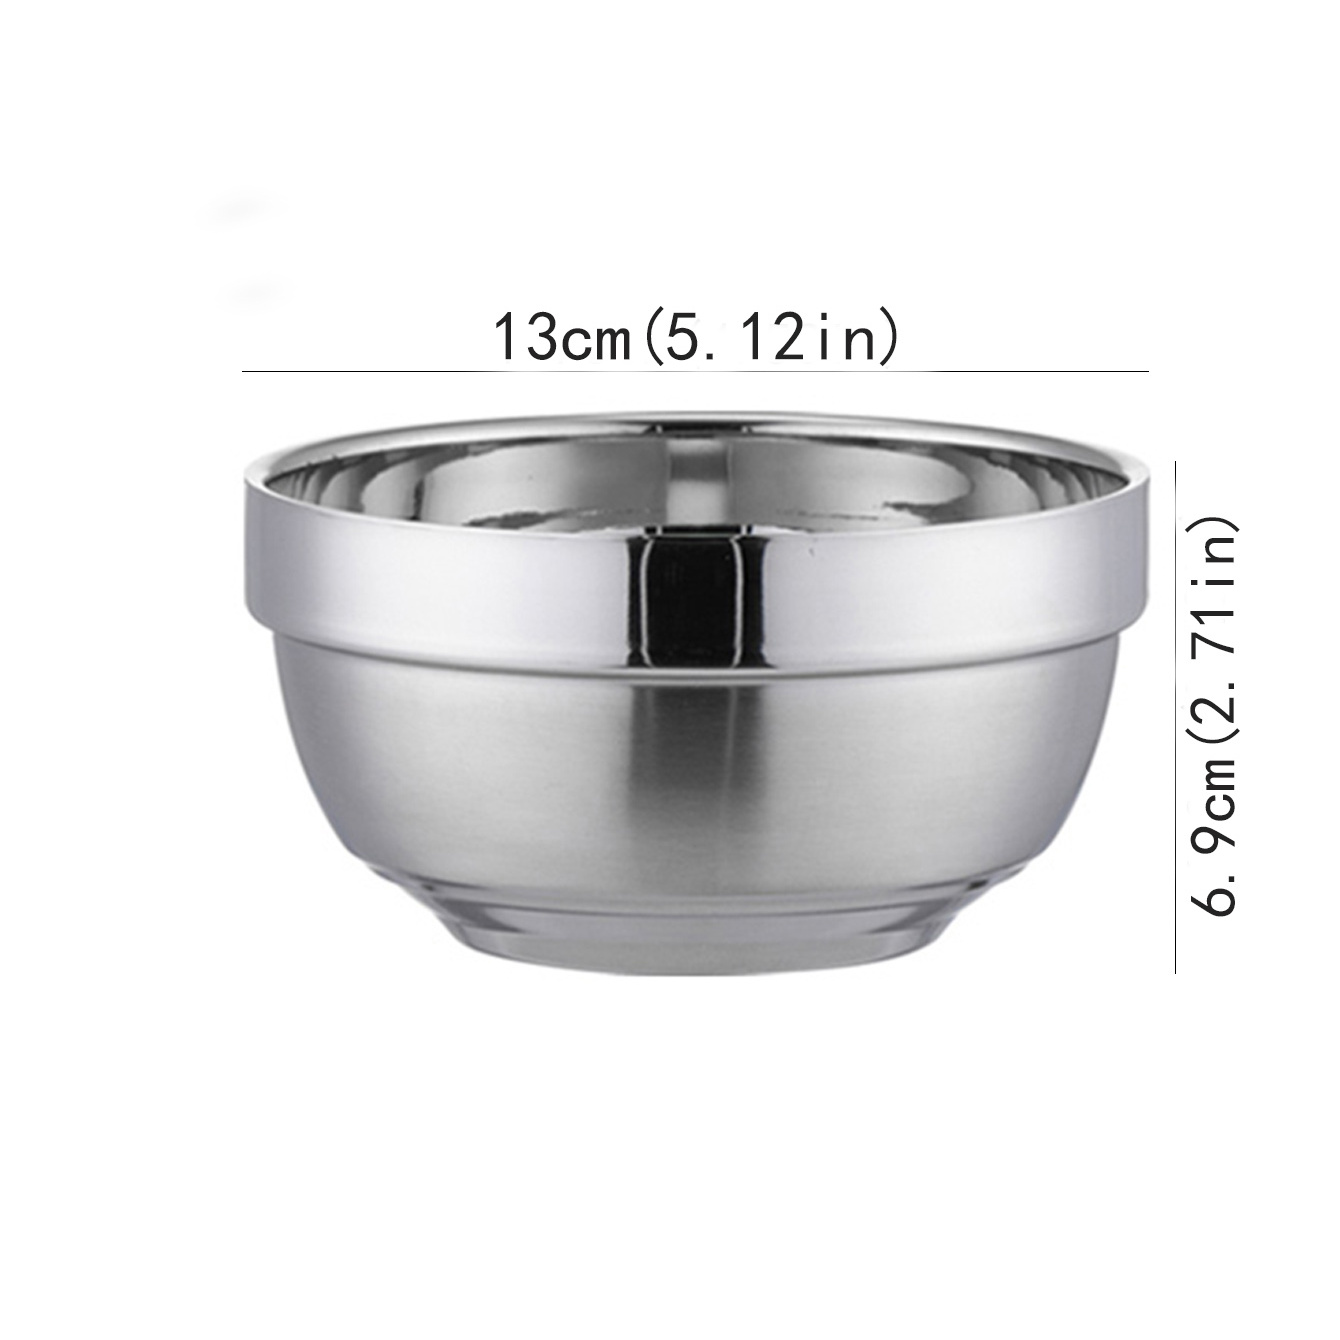 1pc Heat Insulated Stainless Steel Bowl for Serving Ice Cream, Soup,  Cereal, Rice, Noodles, and Salad - Anti-Scalding and Multipurpose